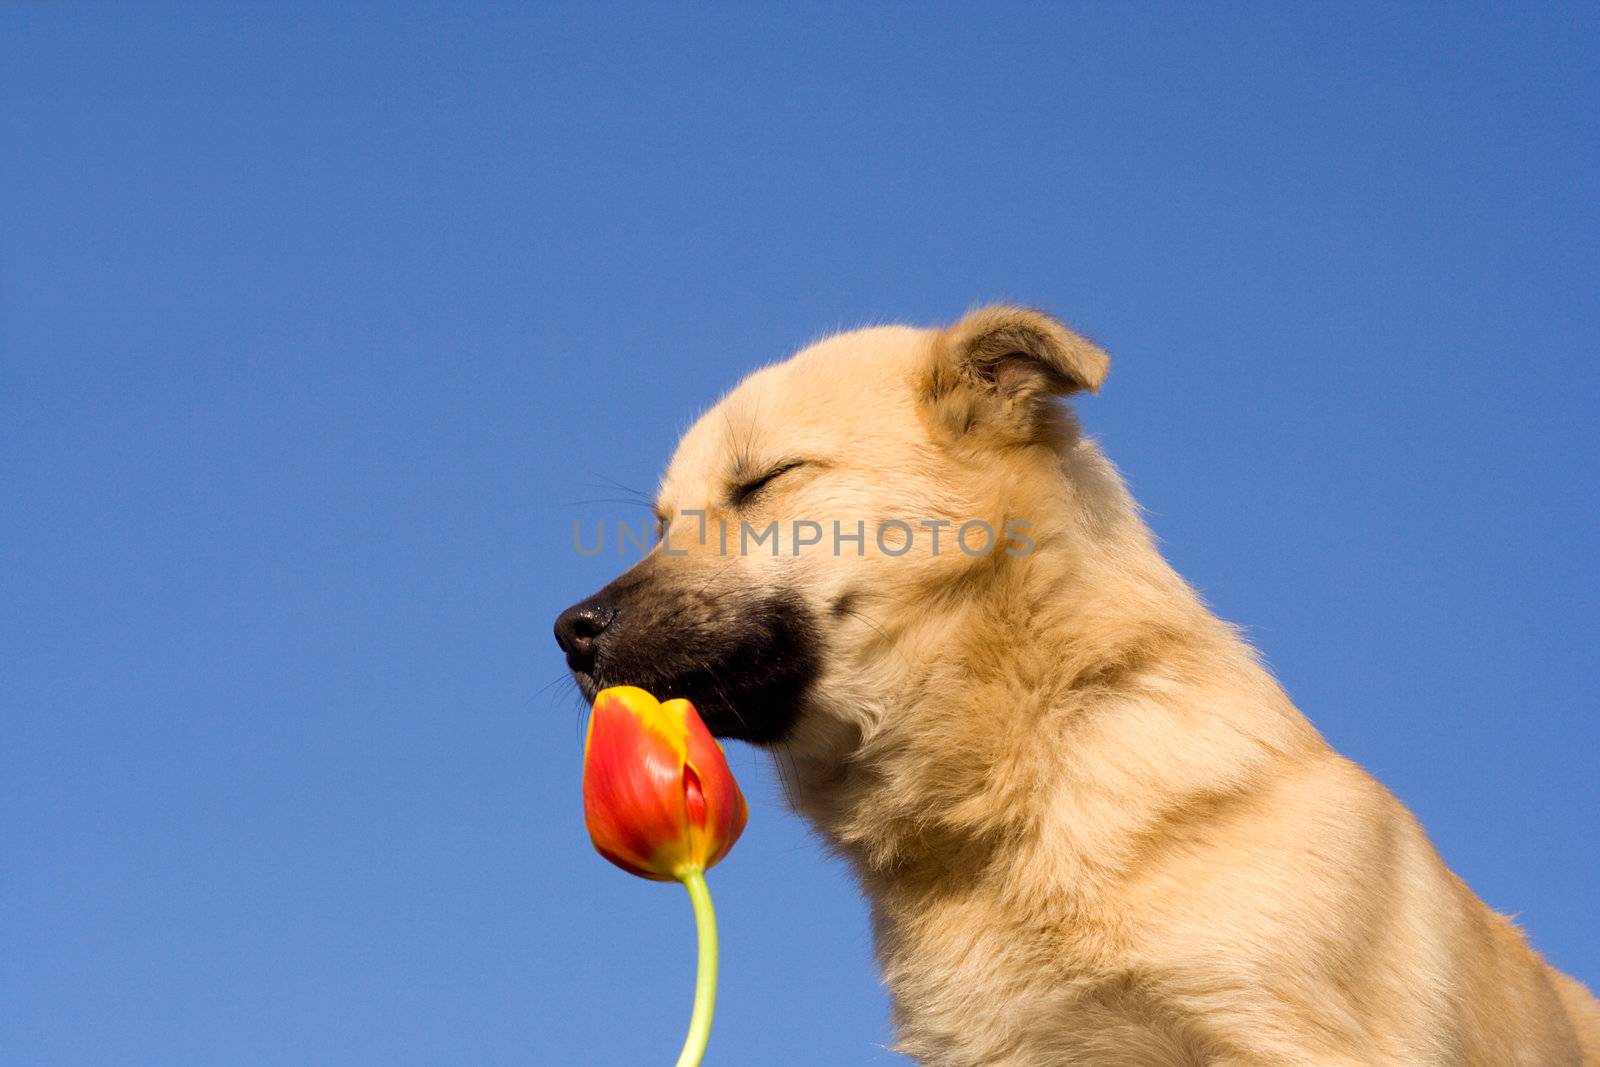 close-up puppy dog  puppy dog close eyes and smelling tulip, against blue sky background